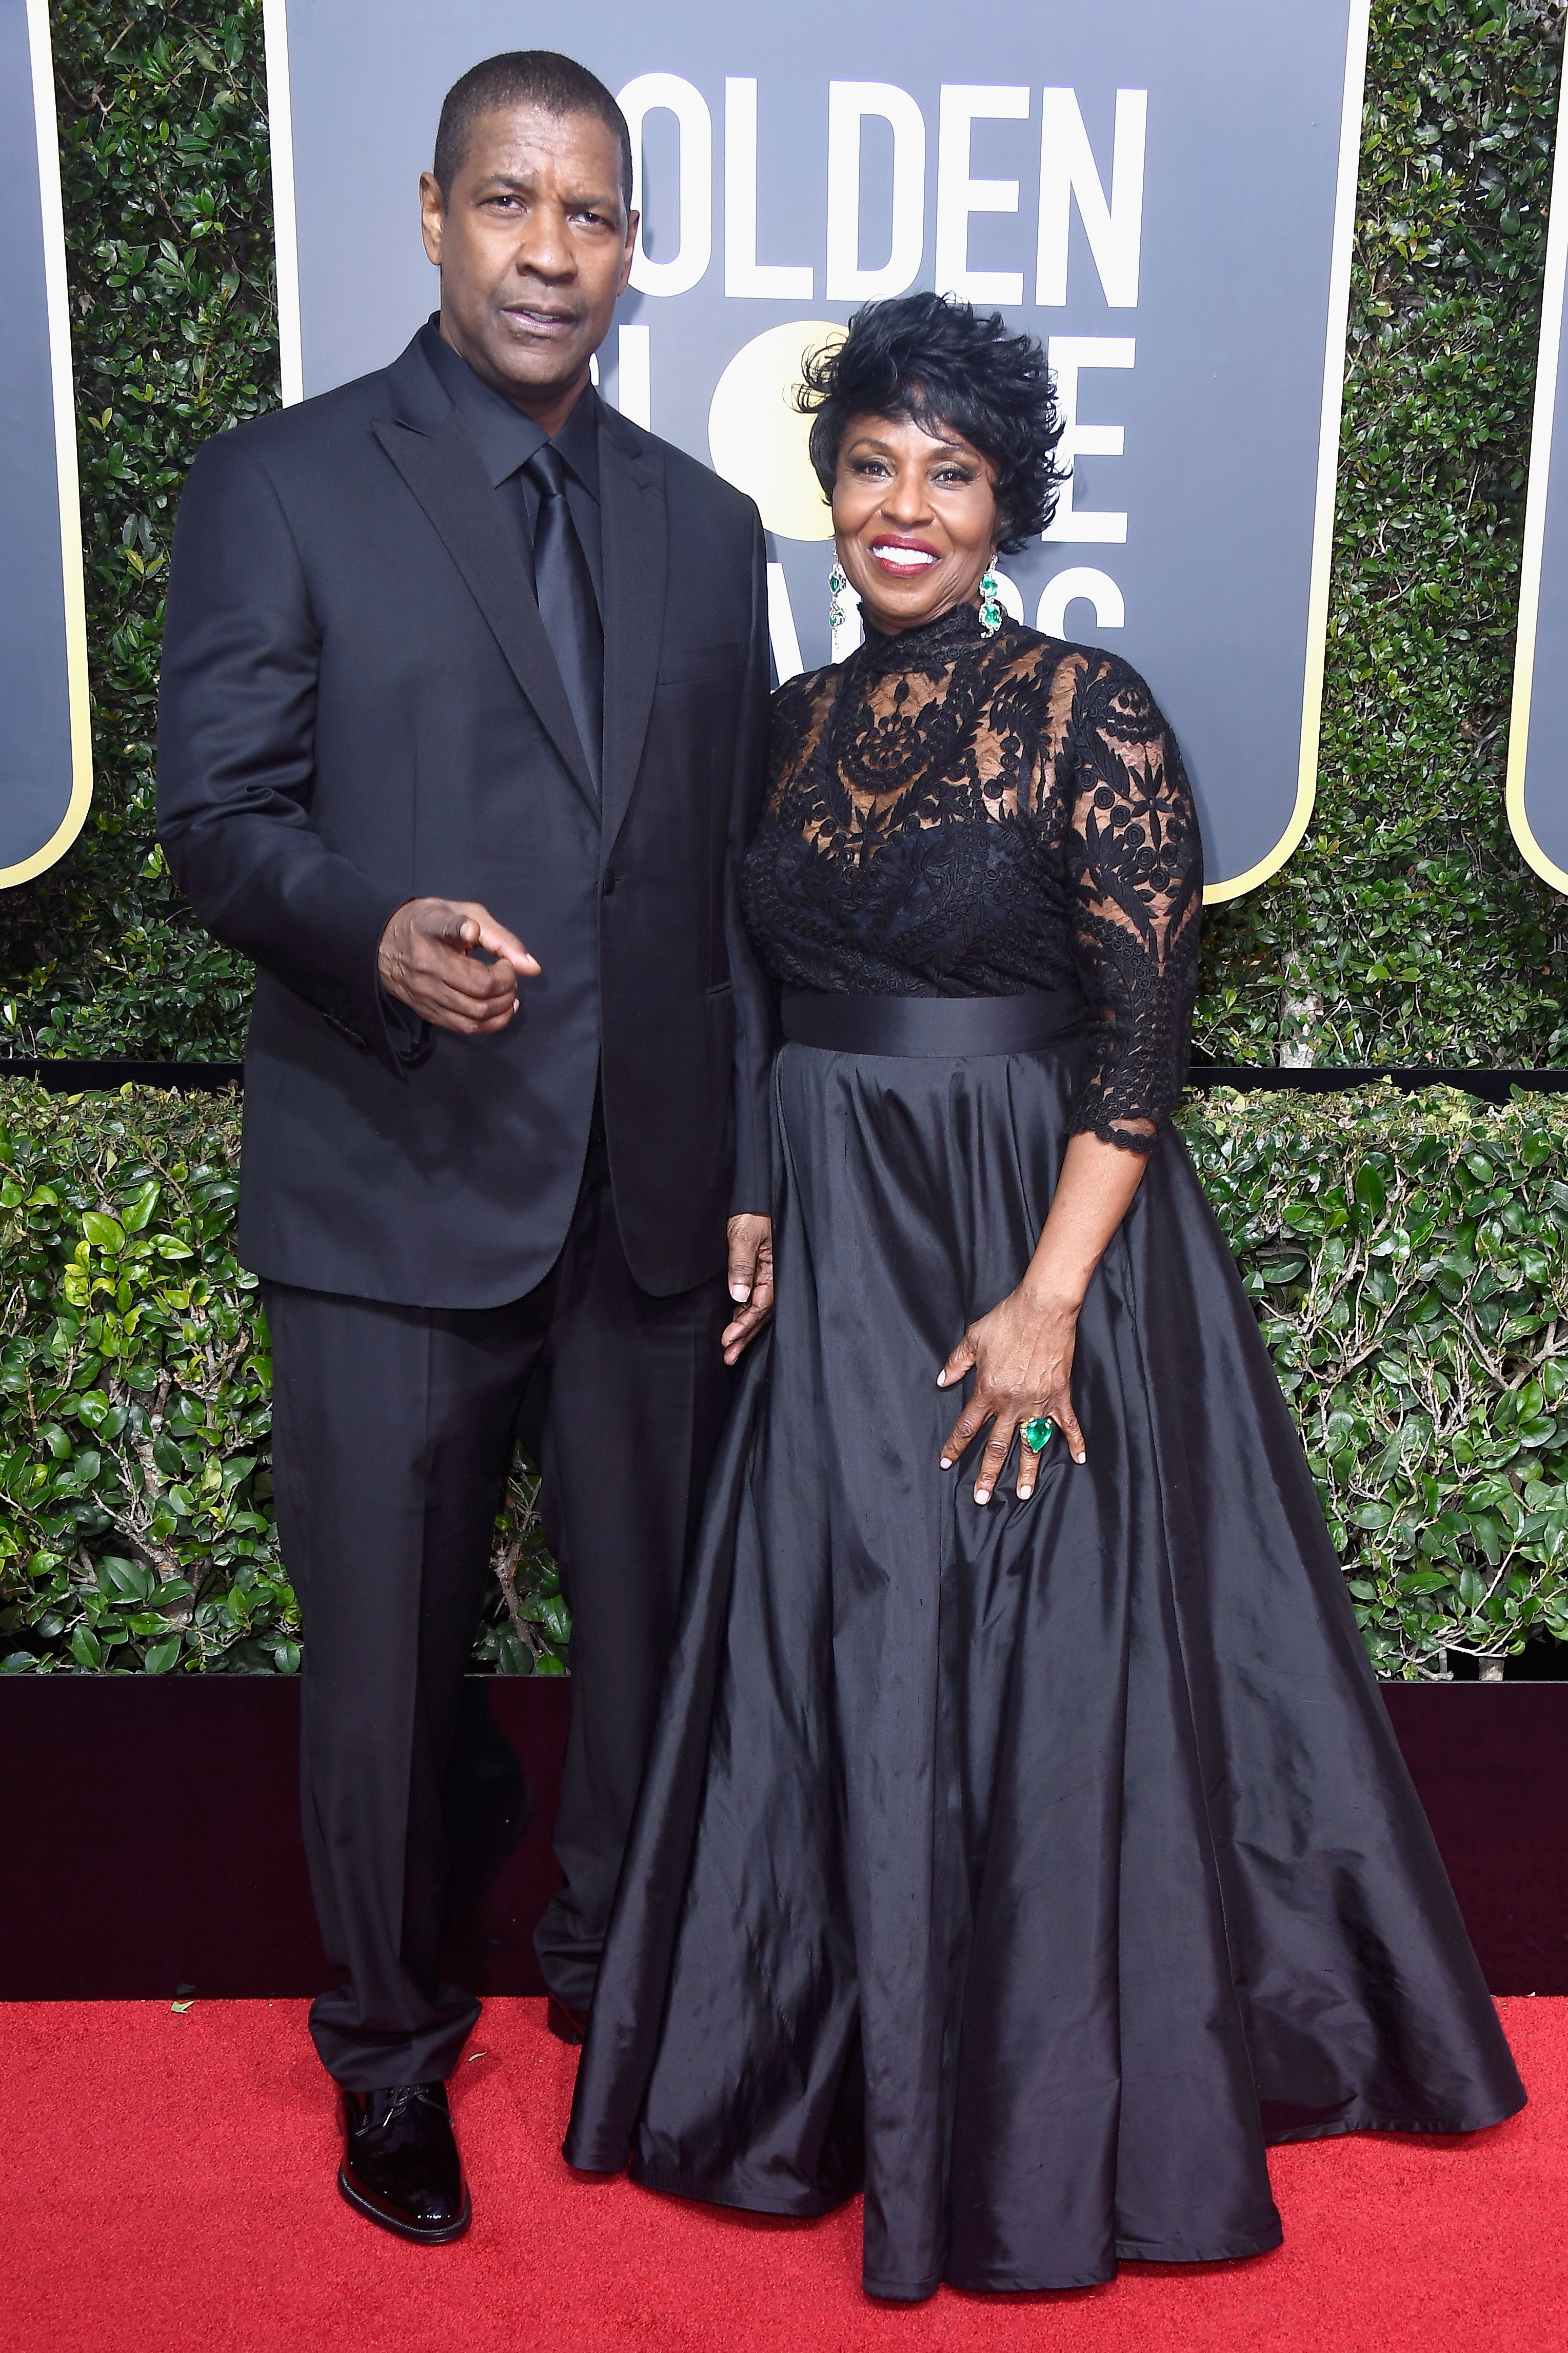 The Golden Globes Red Carpet Was All Black And Totally Beautiful
